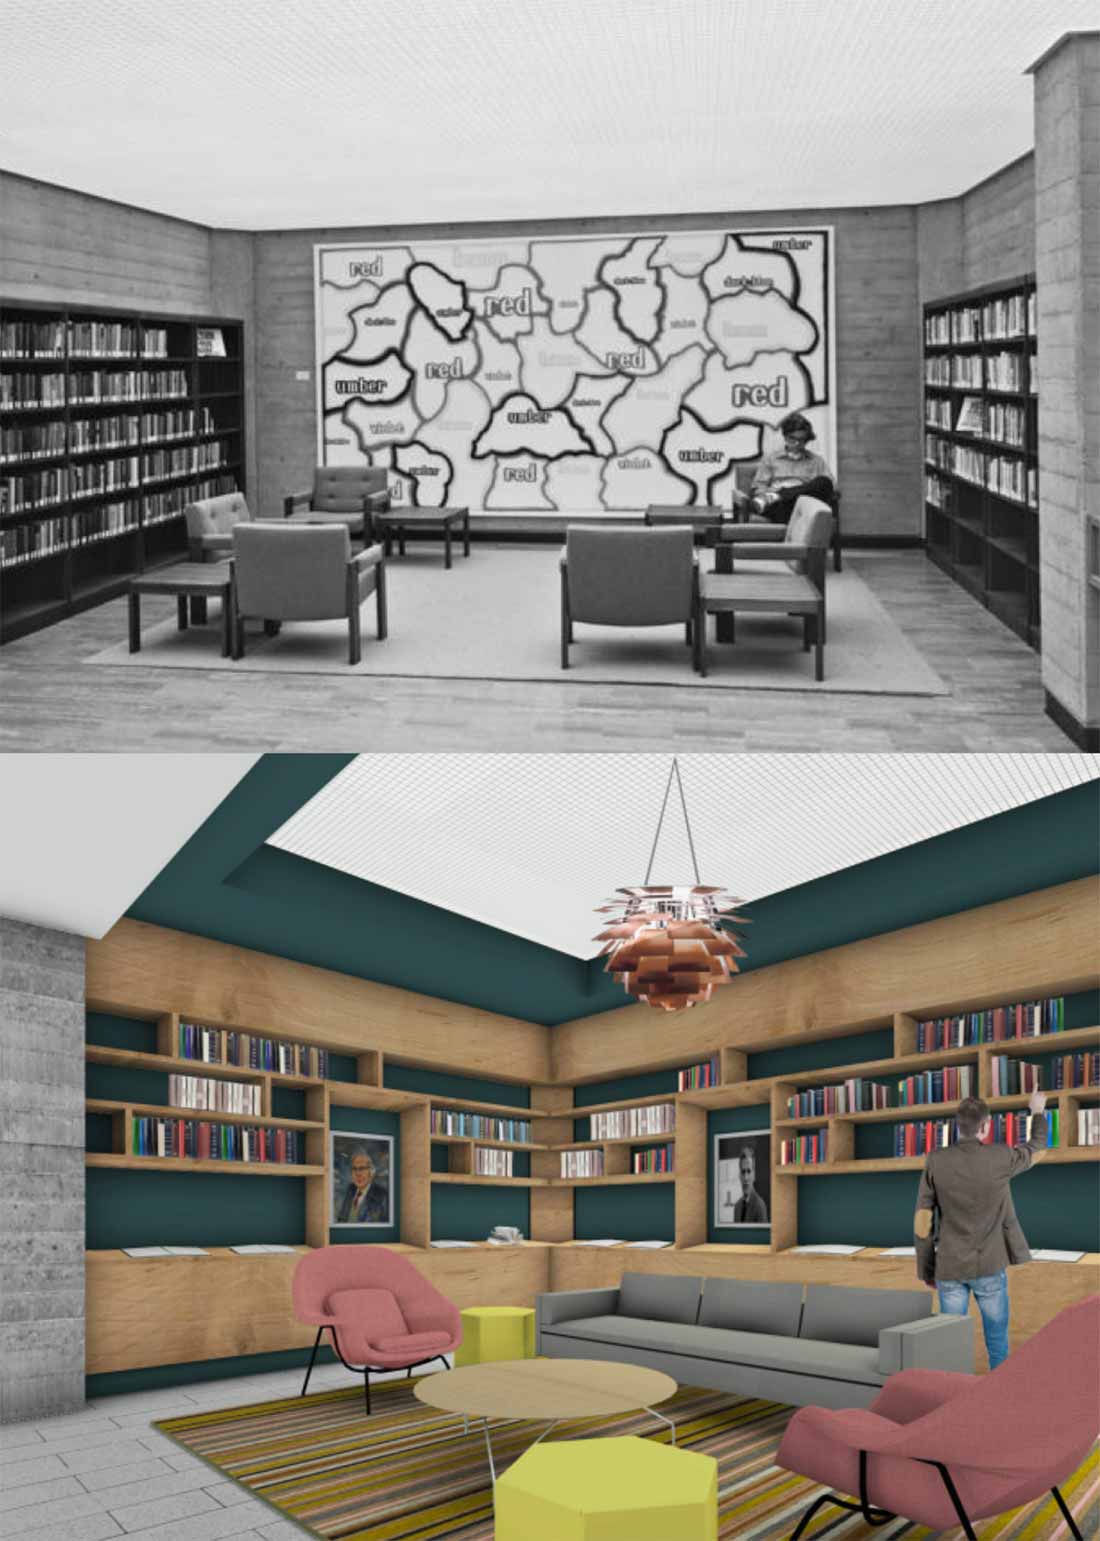 Original photo and future draft rendering of the “meet spot” at Geisel Library